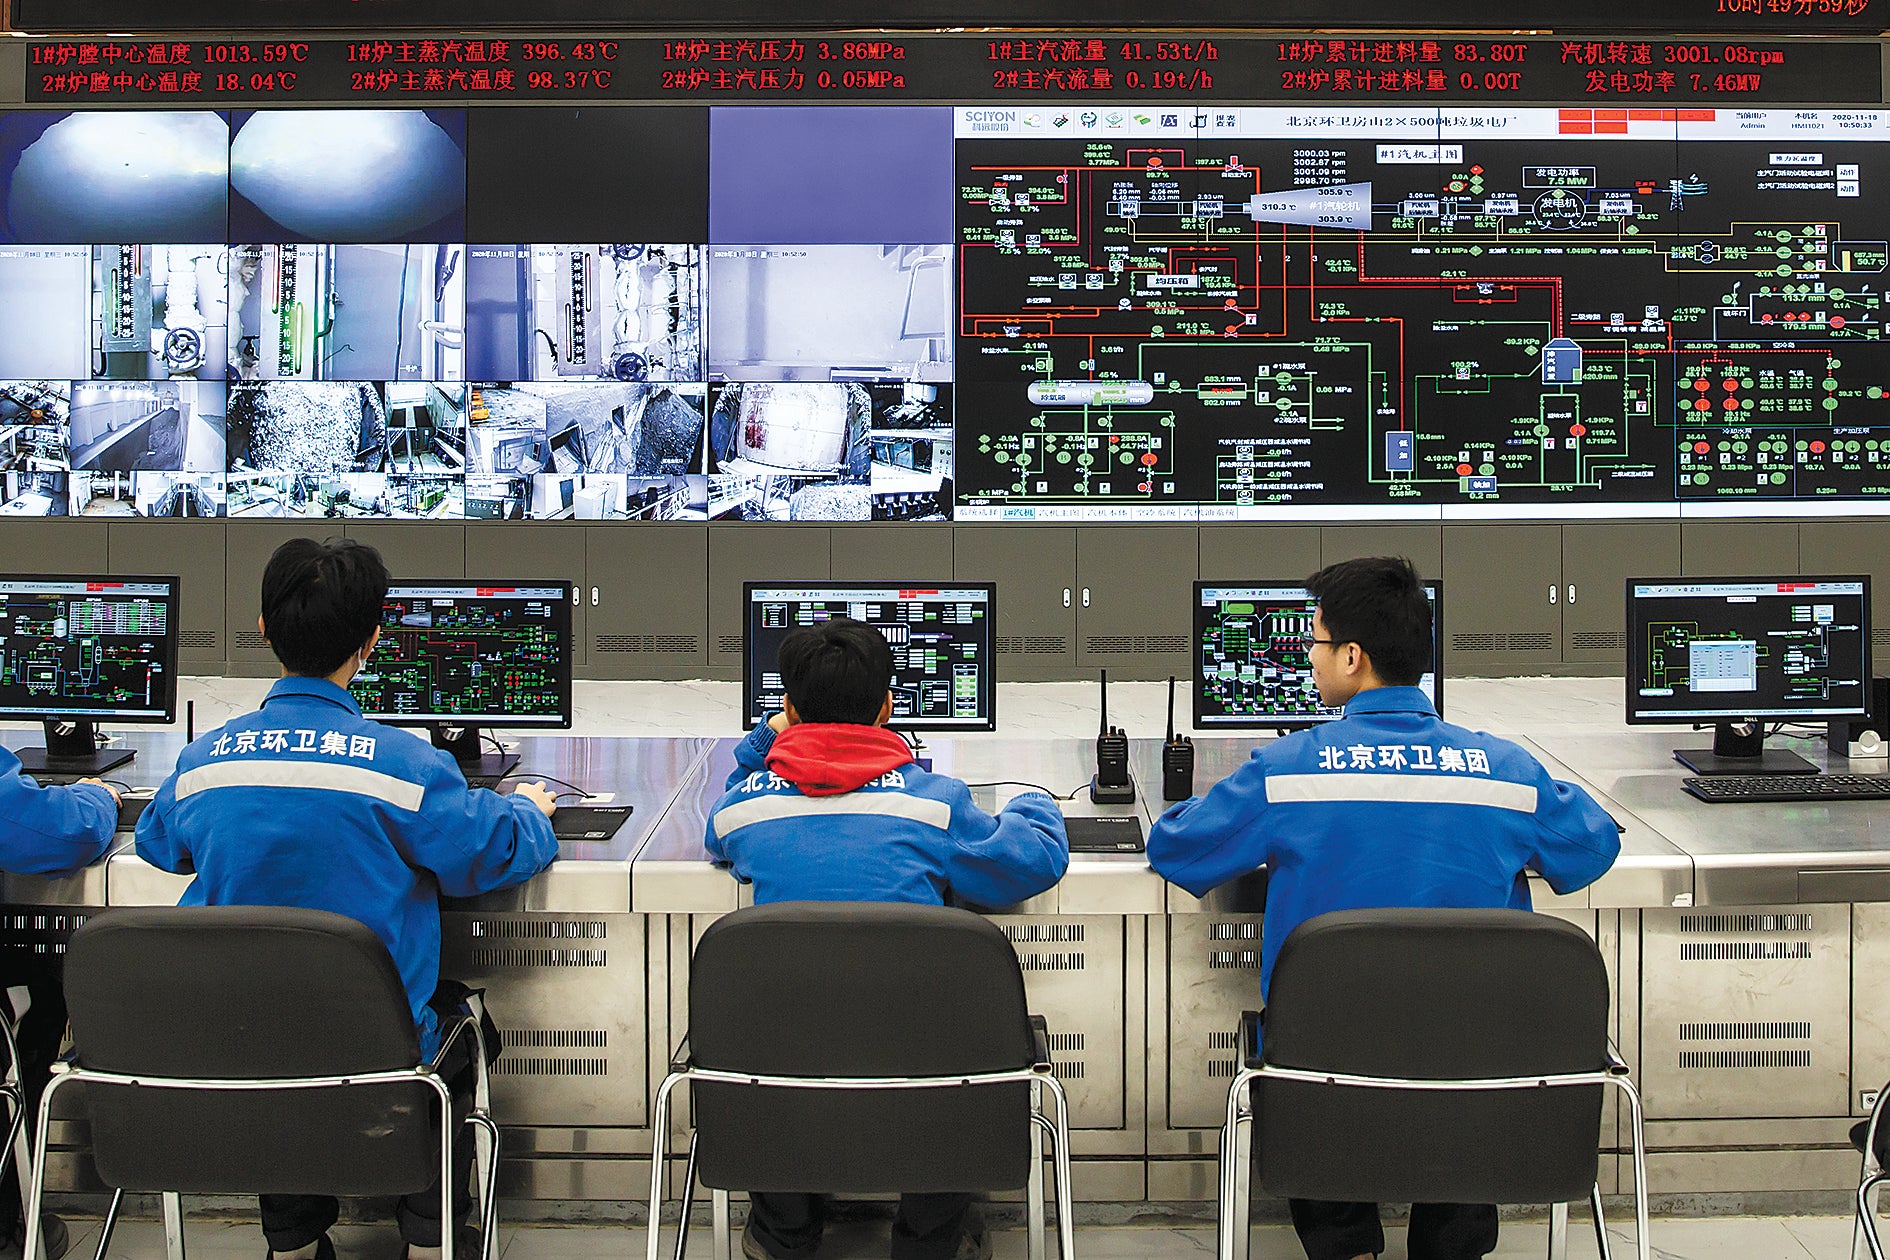 Workers monitor power generation through waste incineration in the control room of the Fangshan circular economy base in Beijing